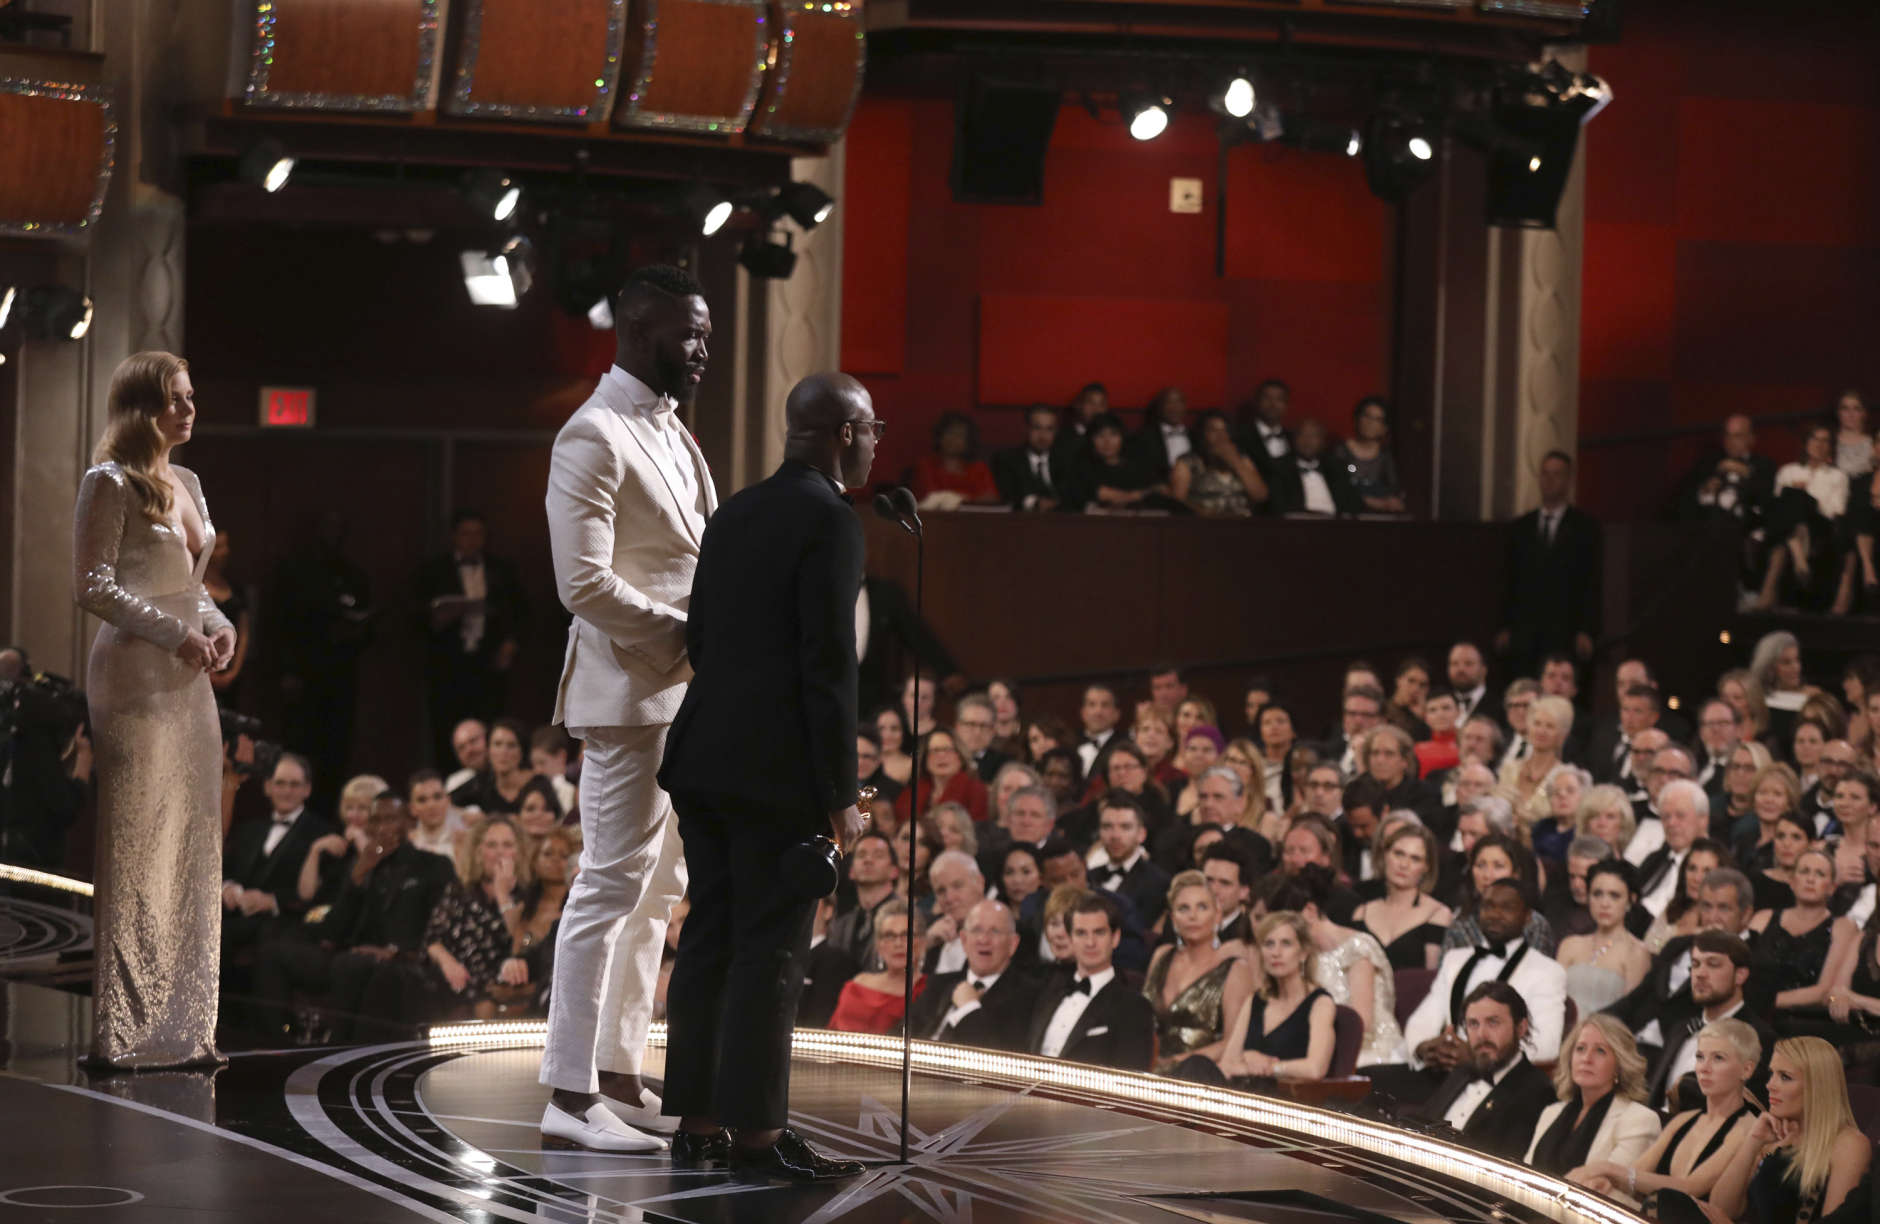 Tarell Alvin McCraney, center, and Barry Jenkins accept the award for best adapted screenplay for "Moonlight" as Amy Adams, left, watches on at the Oscars on Sunday, Feb. 26, 2017, at the Dolby Theatre in Los Angeles. (Photo by Matt Sayles/Invision/AP)